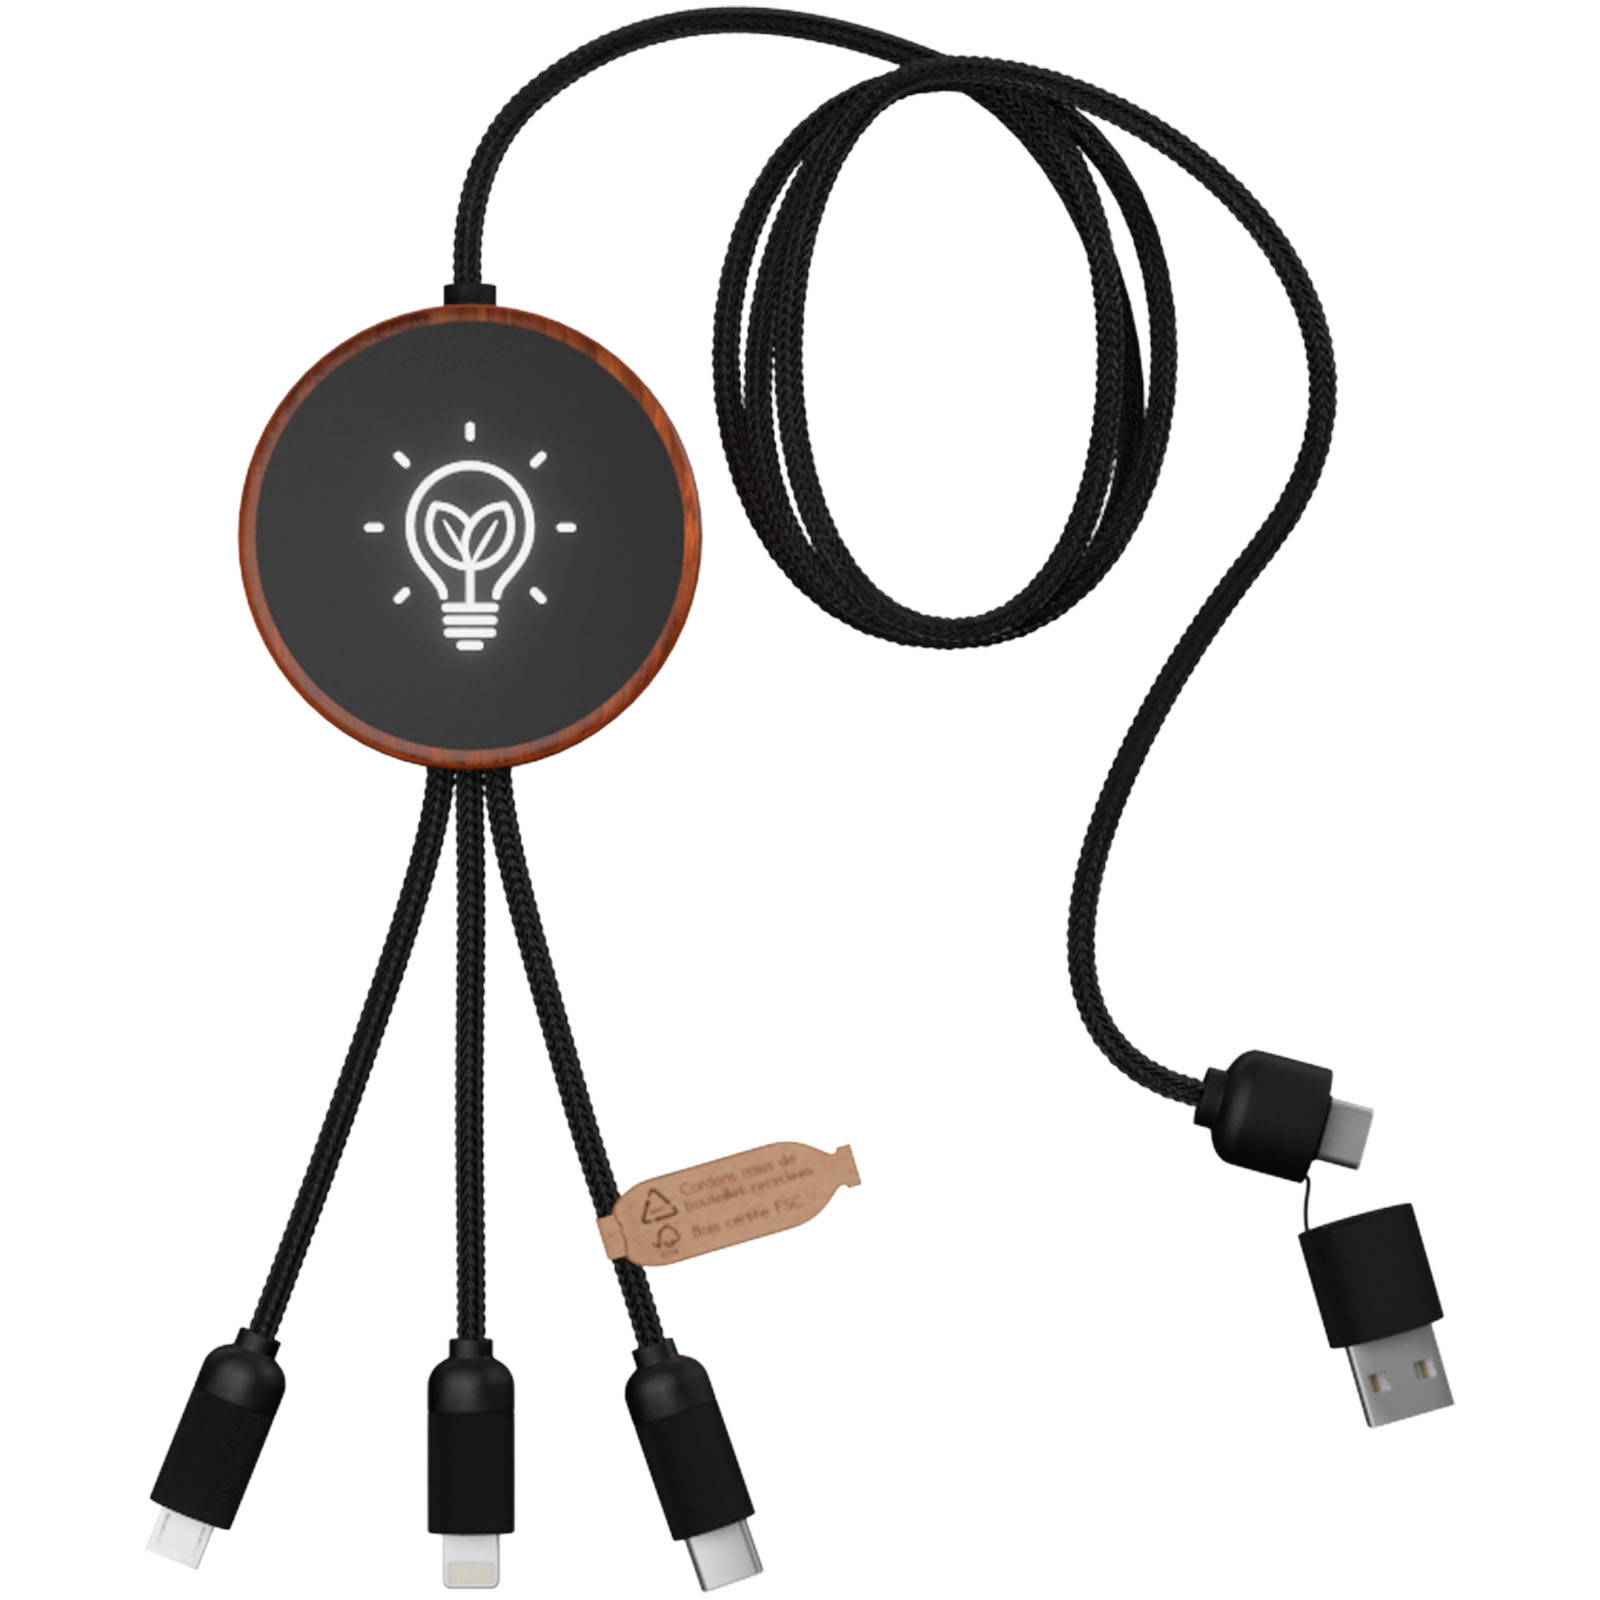 EcoCharge 5-in-1 Charging Kit - Chilworth - Beaminster